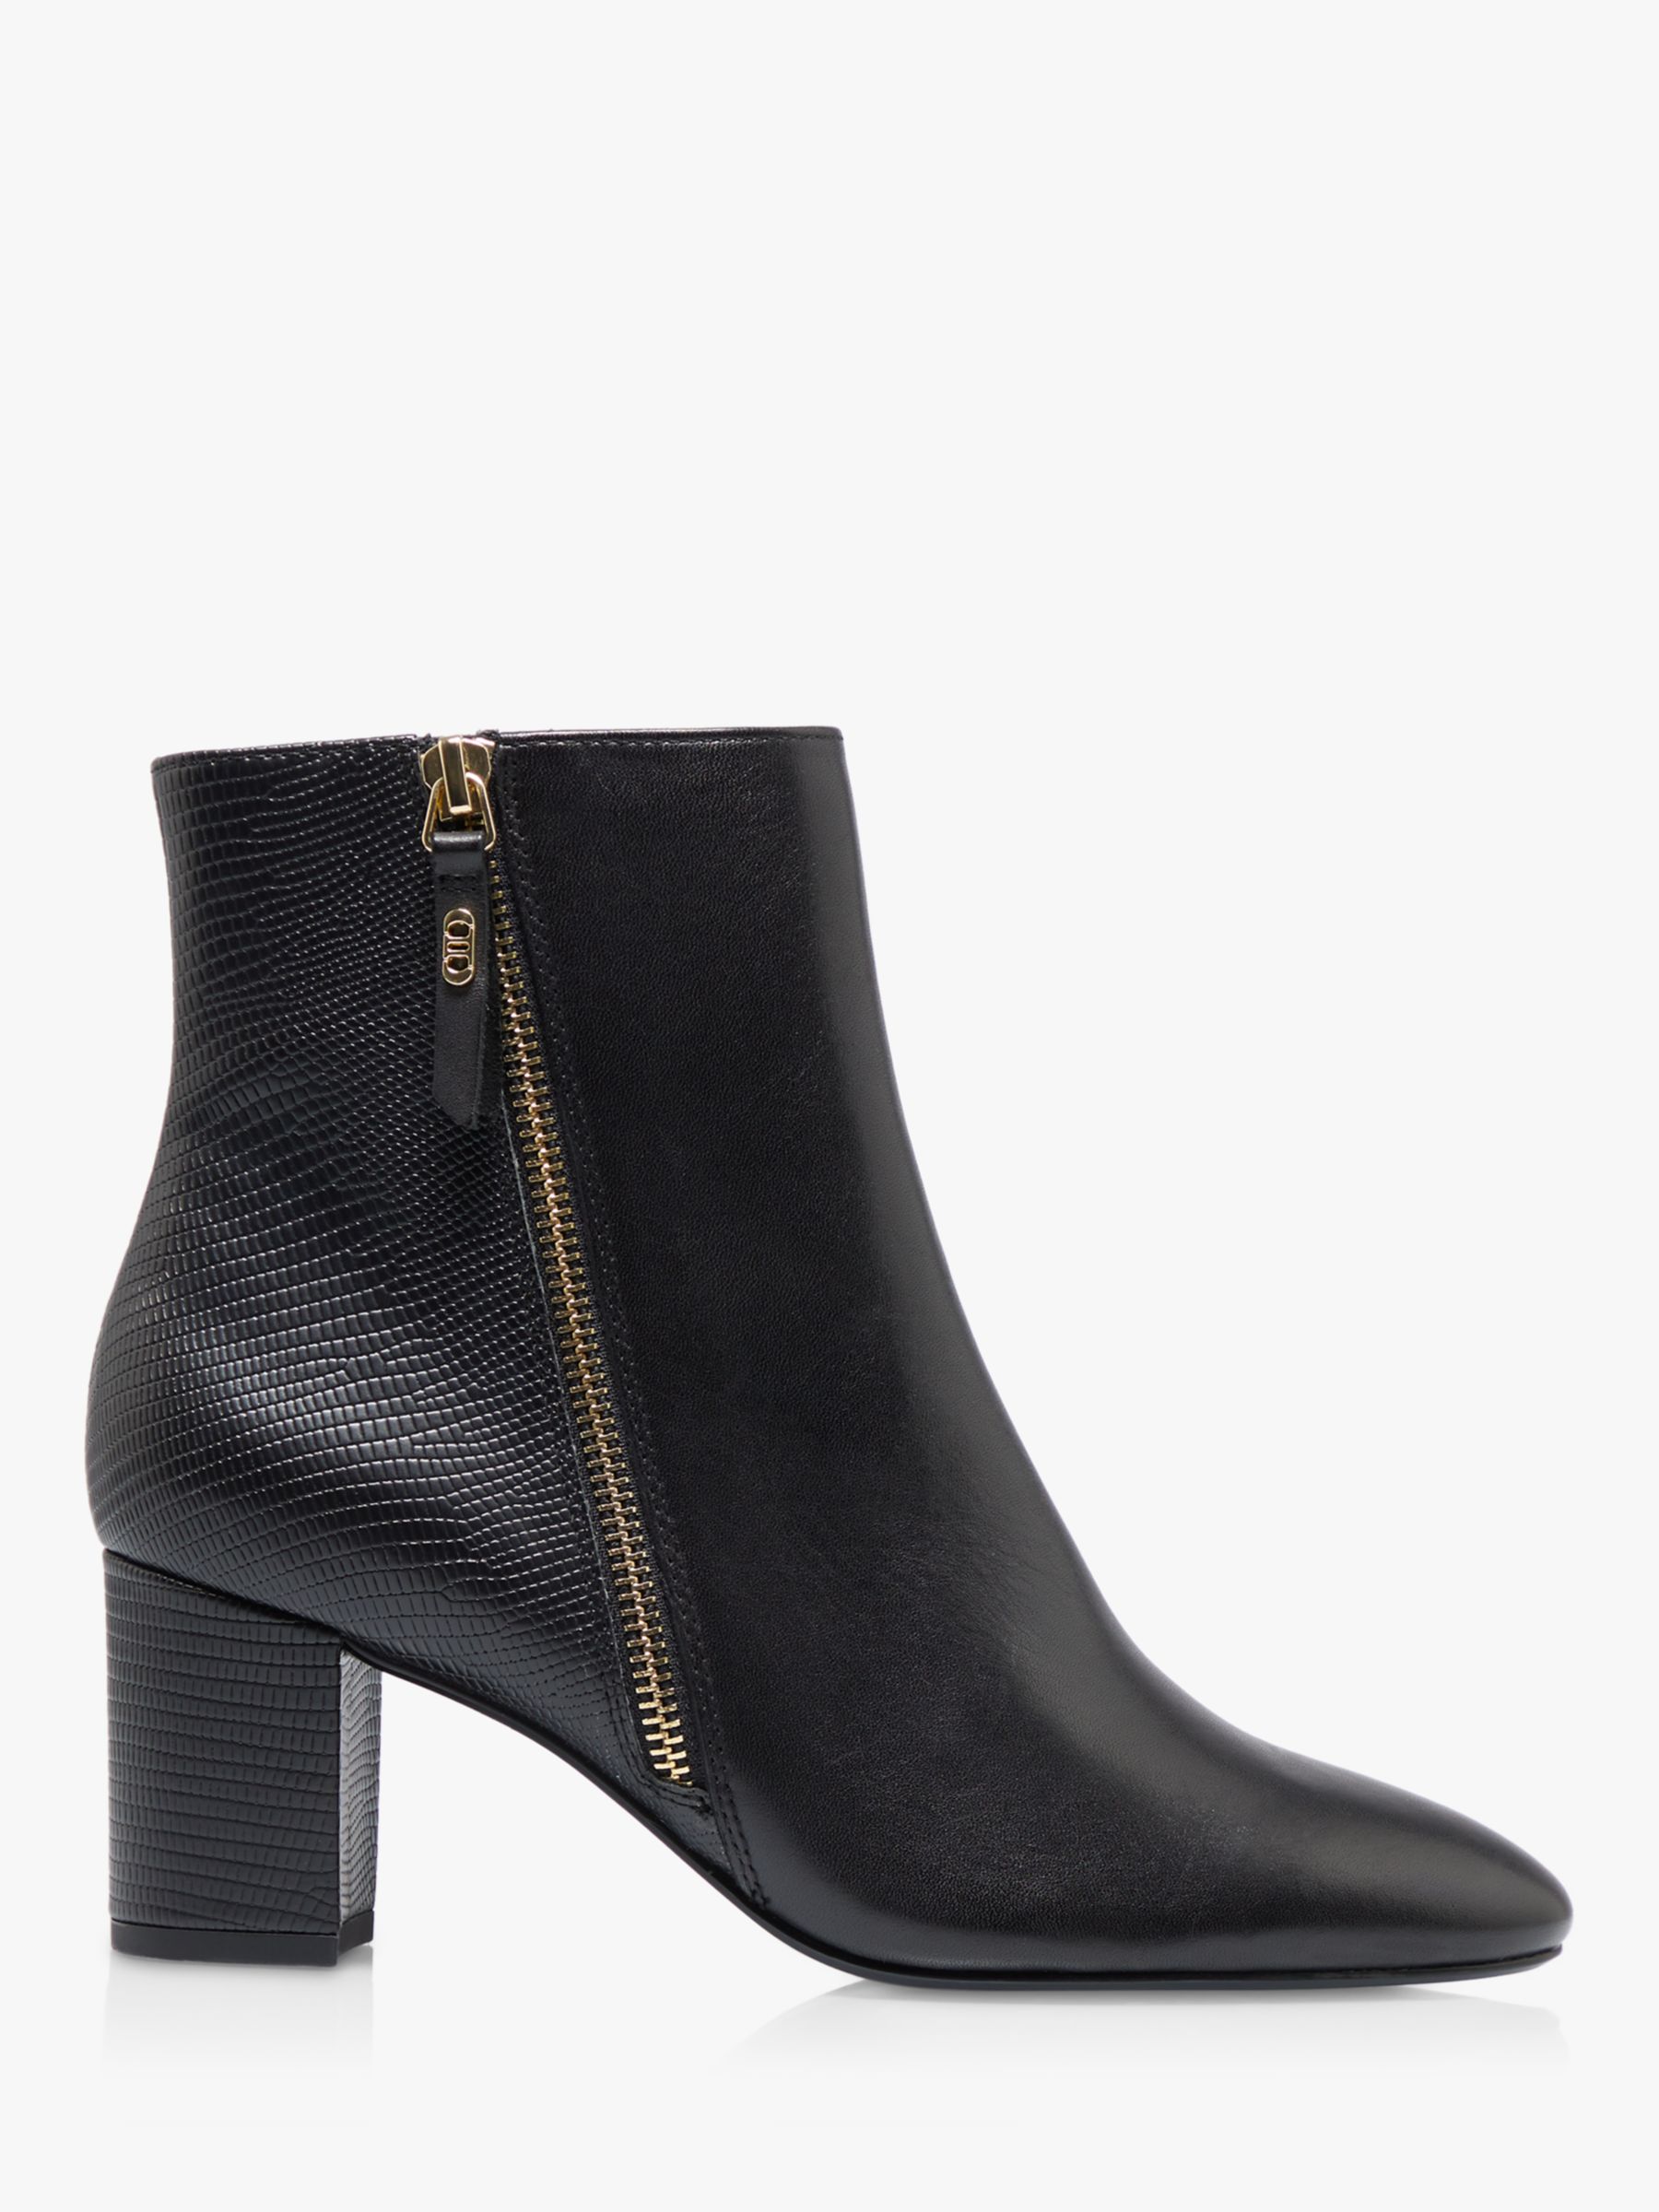 Dune Oricle Leather Side Zip Block Heel Ankle Boots Black At John Lewis And Partners